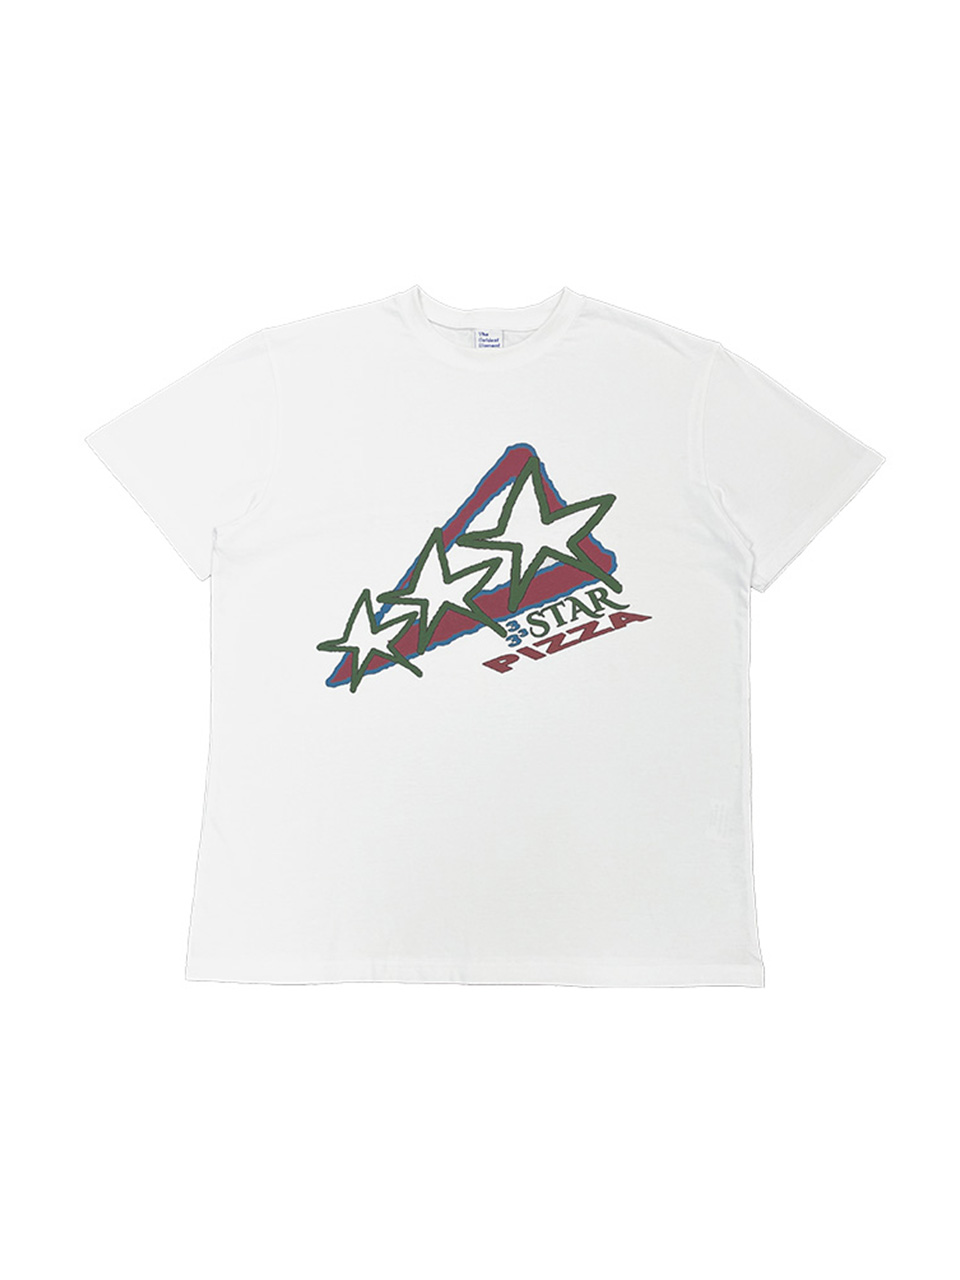 THECOLDESTMOMENT - TCM 3 STAR PIZZA T (WHITE)